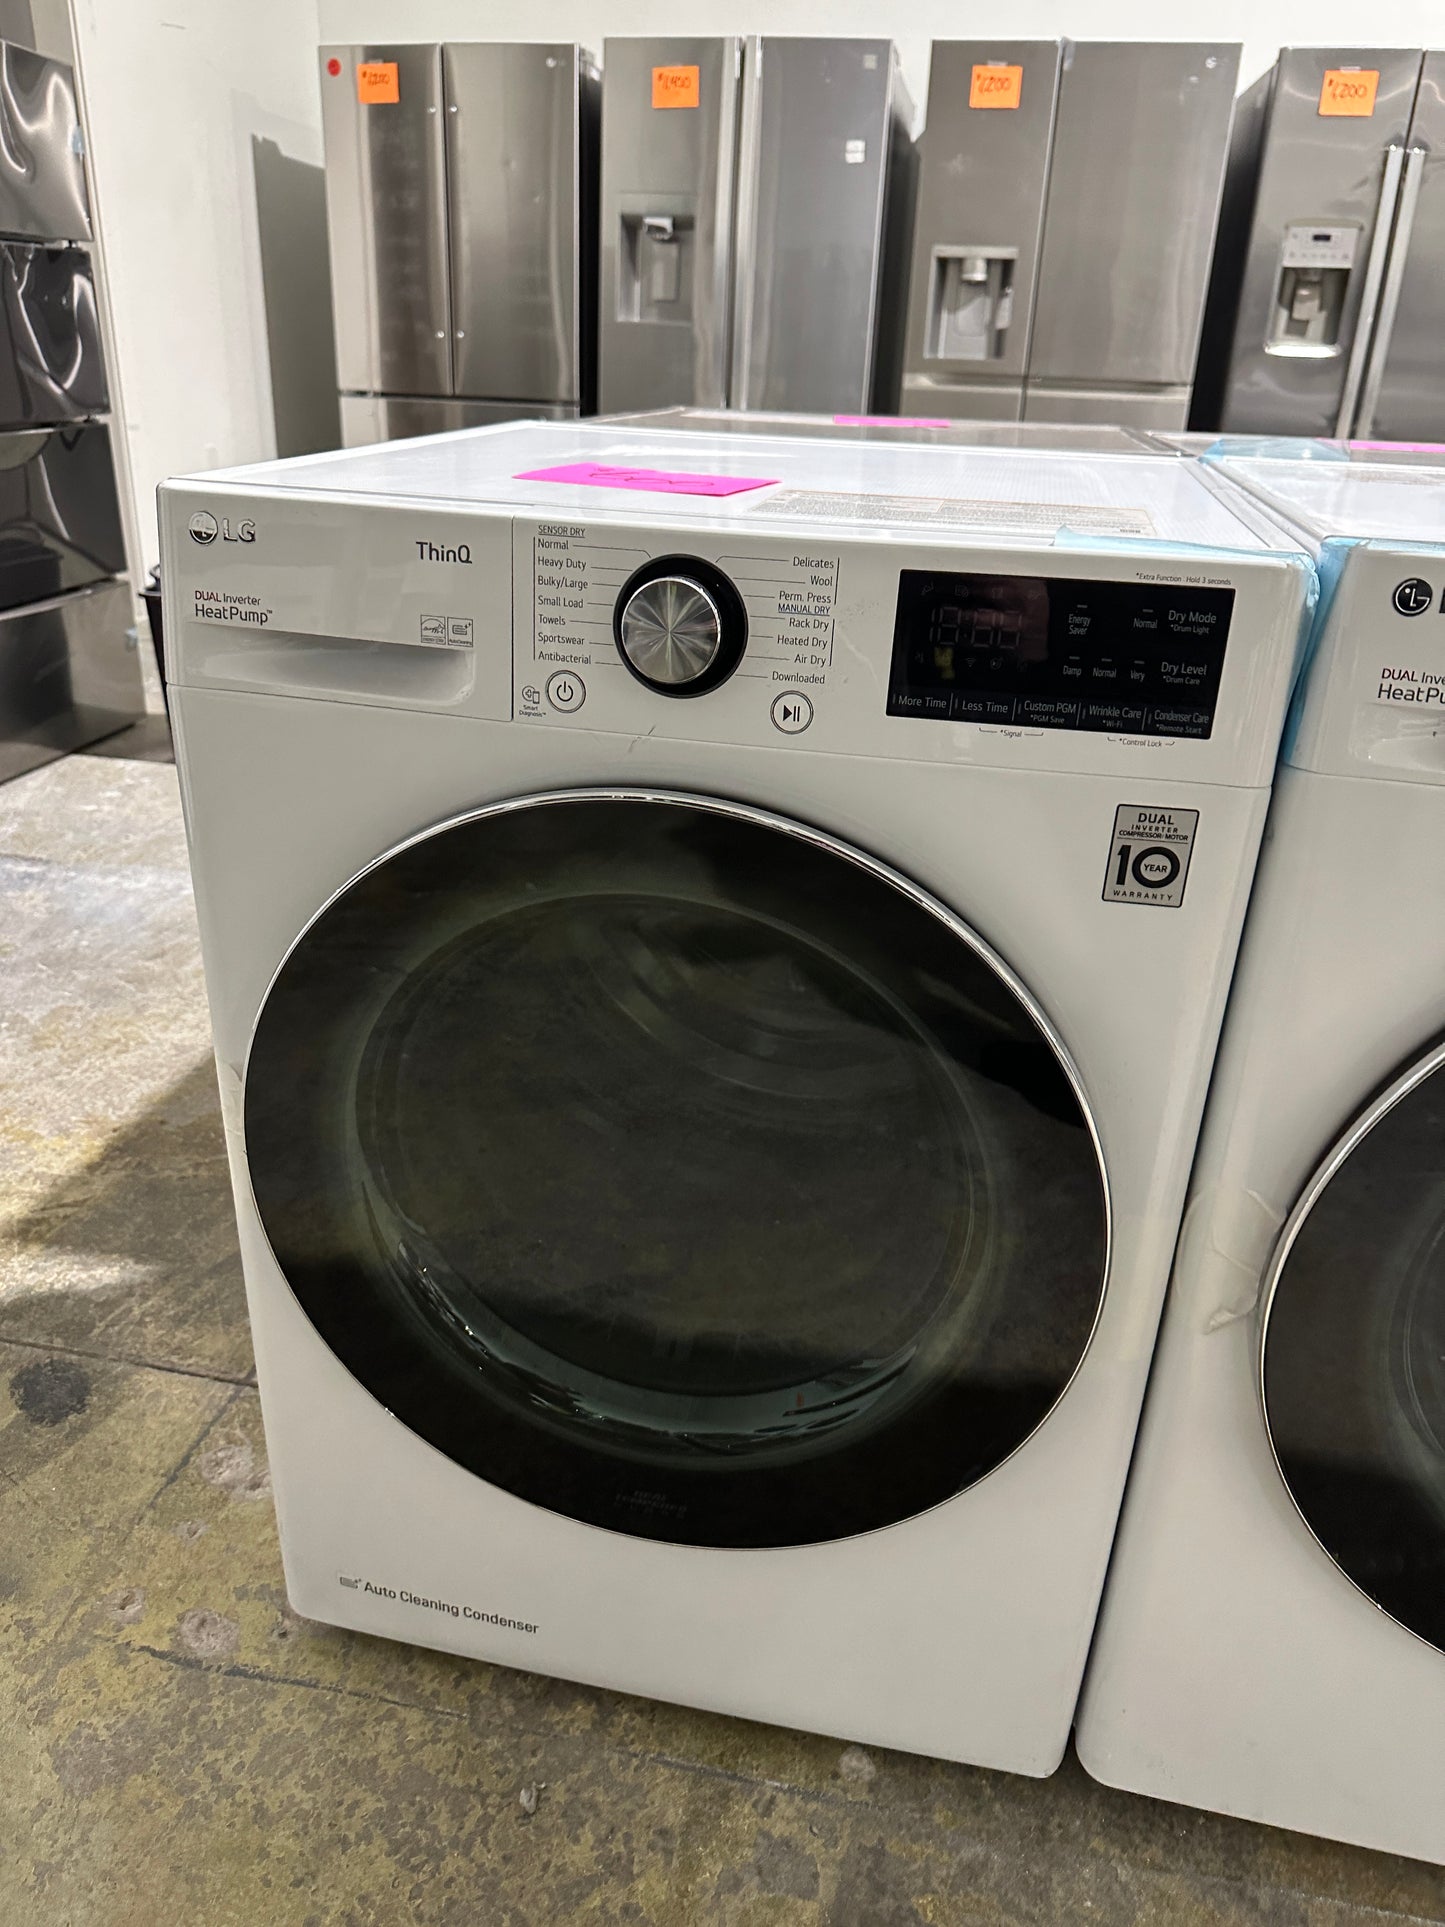 DLHC1455W SMART LG ELECTRIC DRYER - DRY11249S